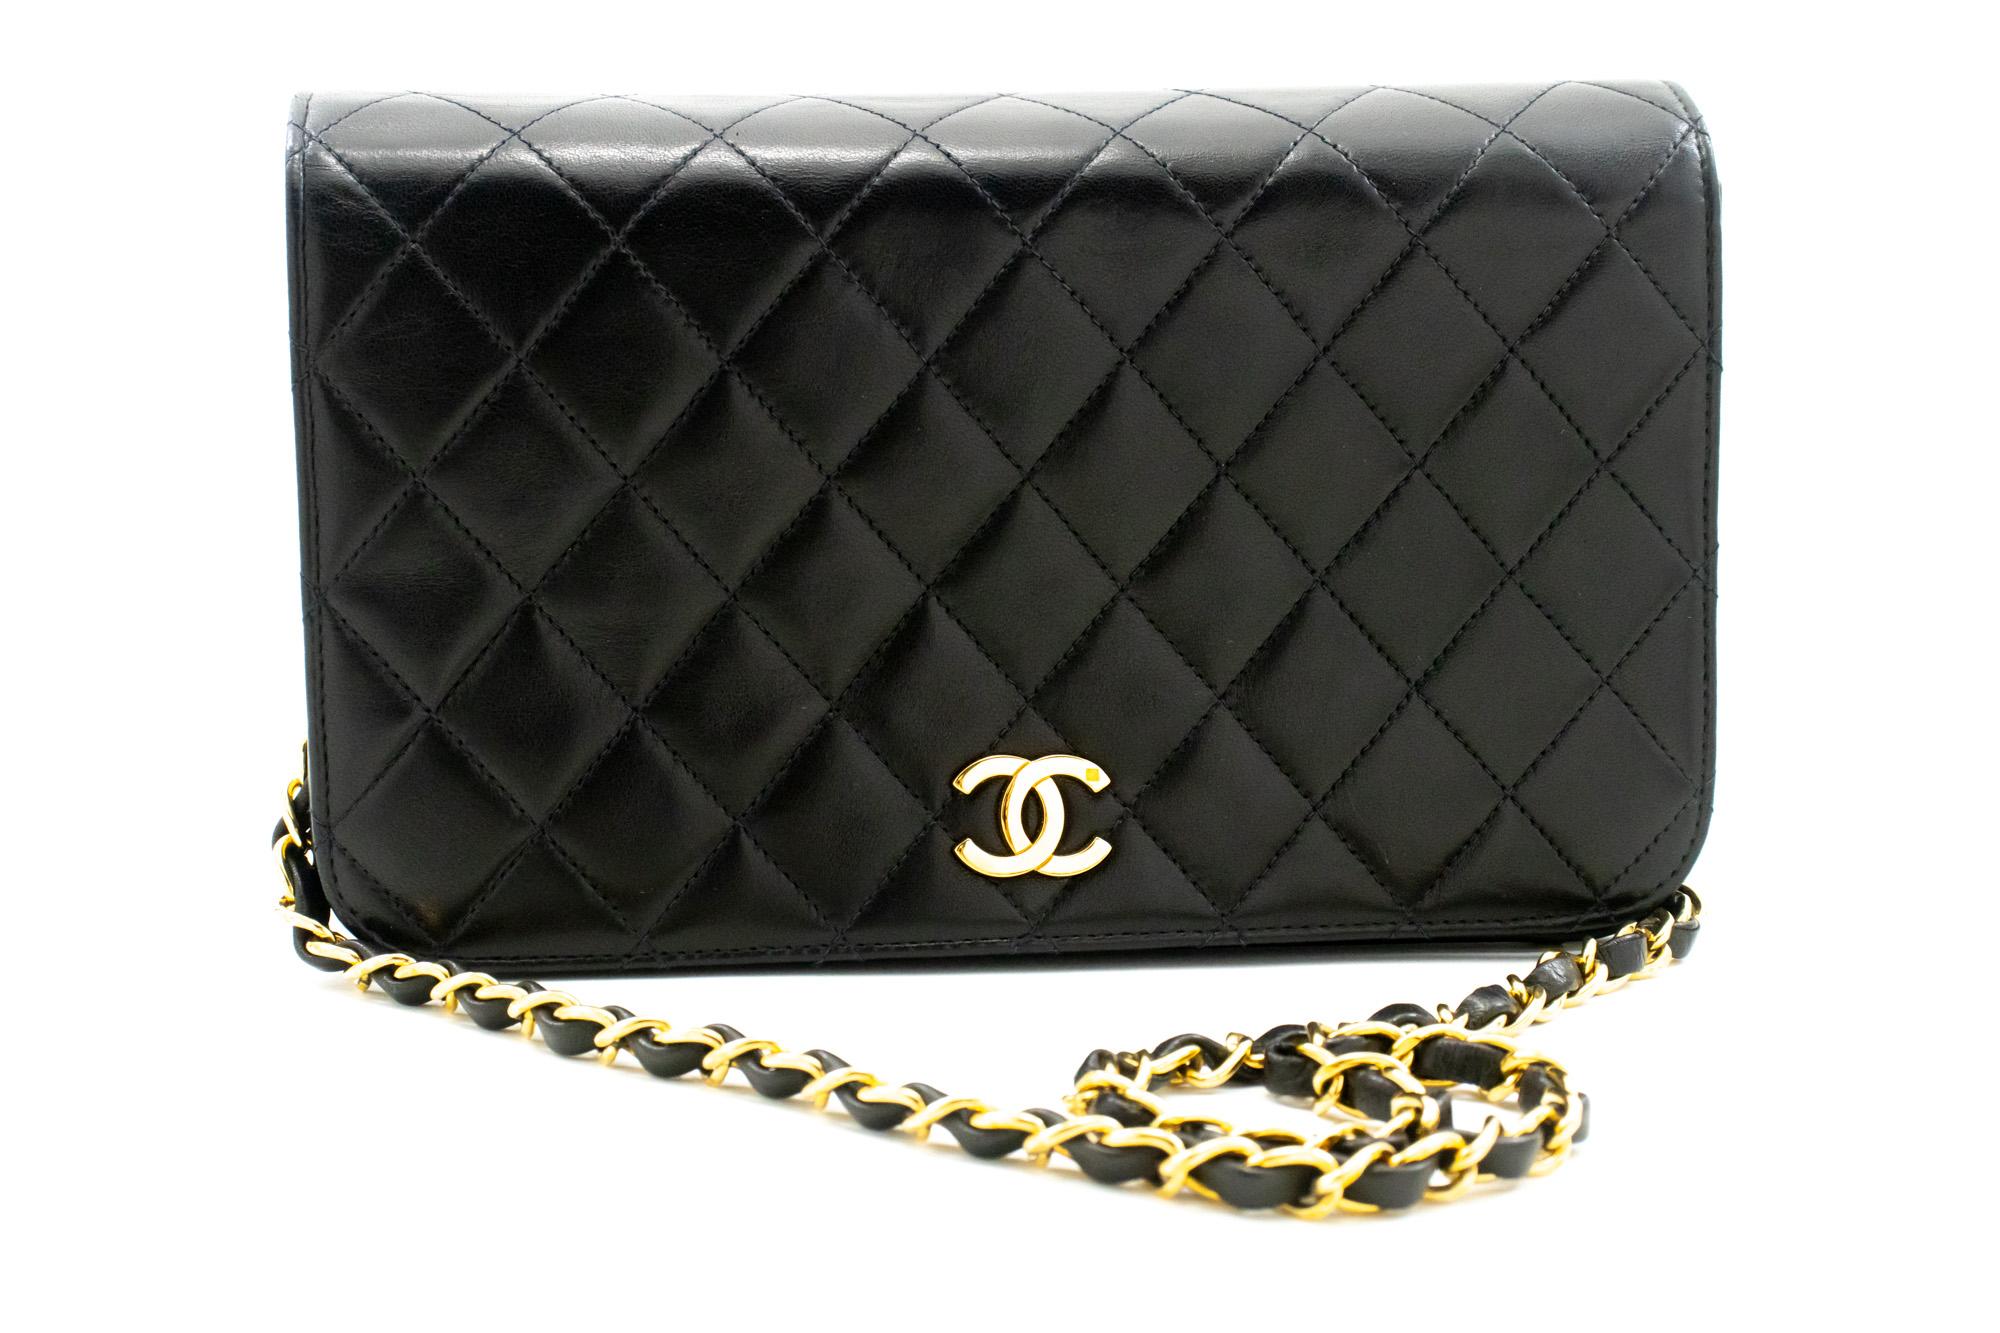 An authentic CHANEL Full Flap Chain Shoulder Bag Clutch Black Quilted made of black Lambskin. The color is Black. The outside material is Leather. The pattern is Solid. This item is Vintage / Classic. The year of manufacture would be